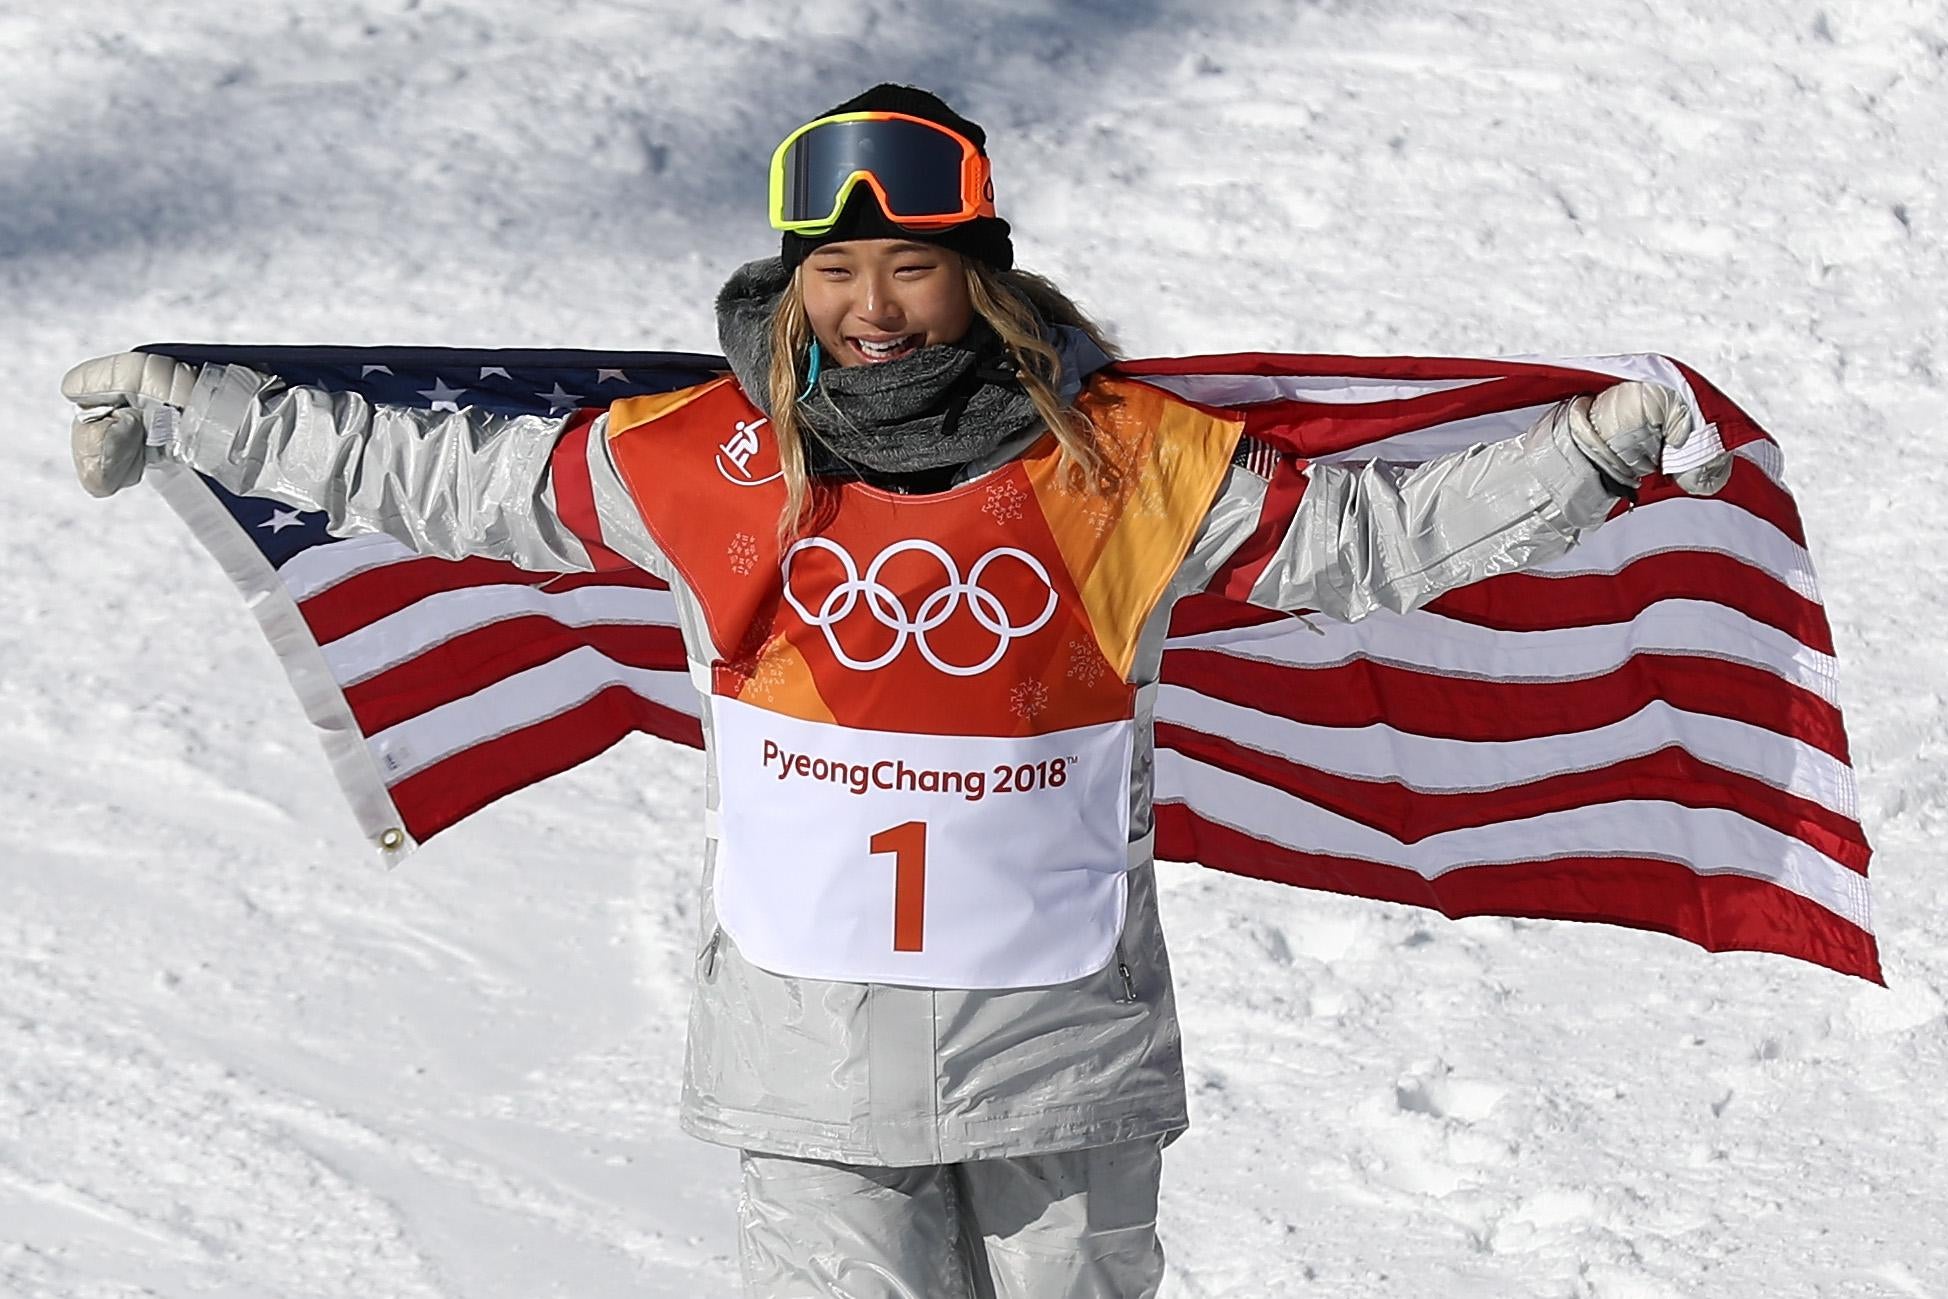 PYEONGCHANG-GUN, SOUTH KOREA - FEBRUARY 13:  Gold medalist Chloe Kim of the United States celebrates winning the Snowboard Ladies' Halfpipe Final on day four of the PyeongChang 2018 Winter Olympic Games at Phoenix Snow Park on February 13, 2018 in Pyeongchang-gun, South Korea.  (Photo by Clive Rose/Getty Images)